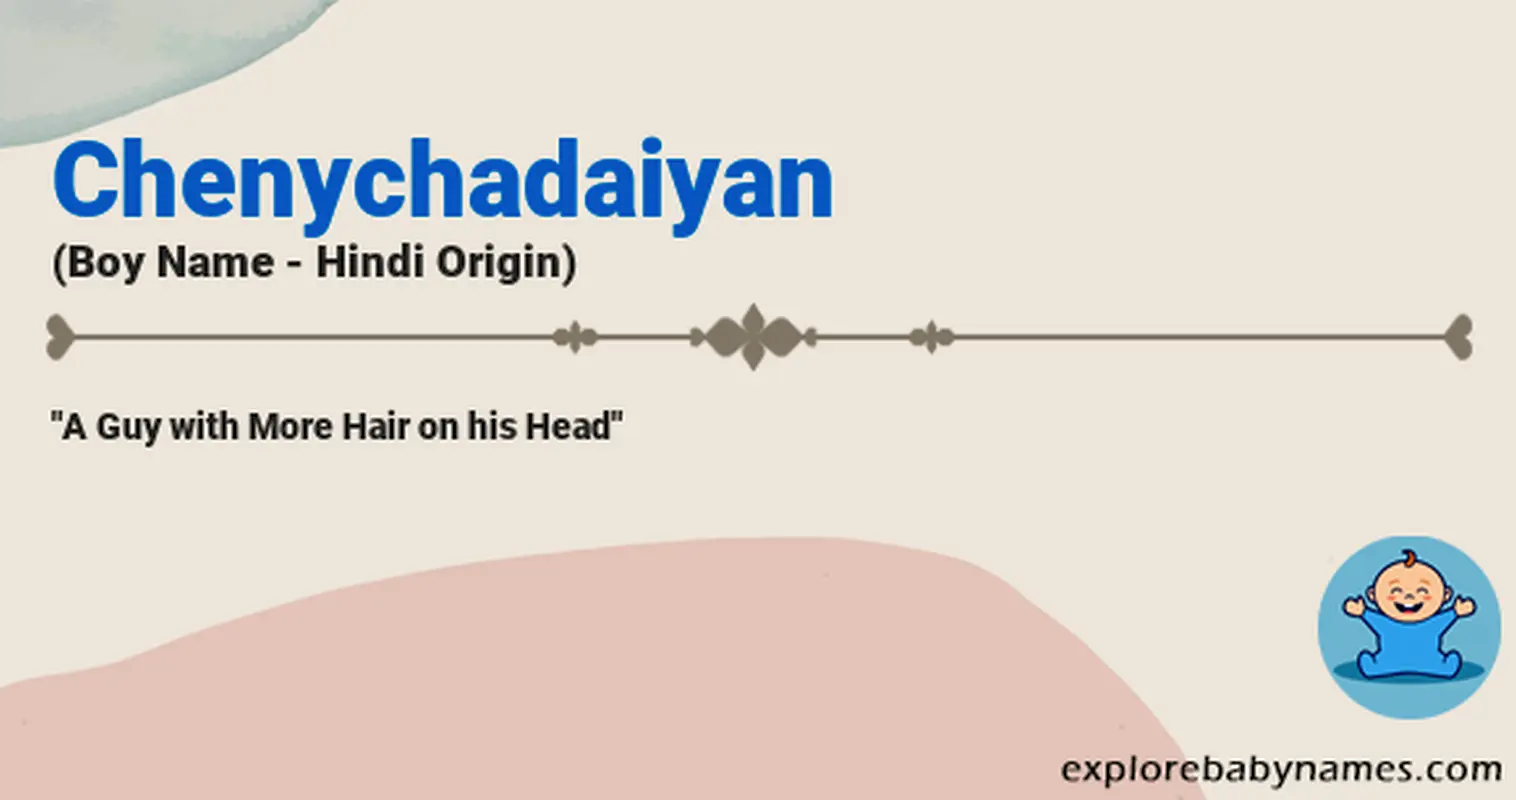 Meaning of Chenychadaiyan